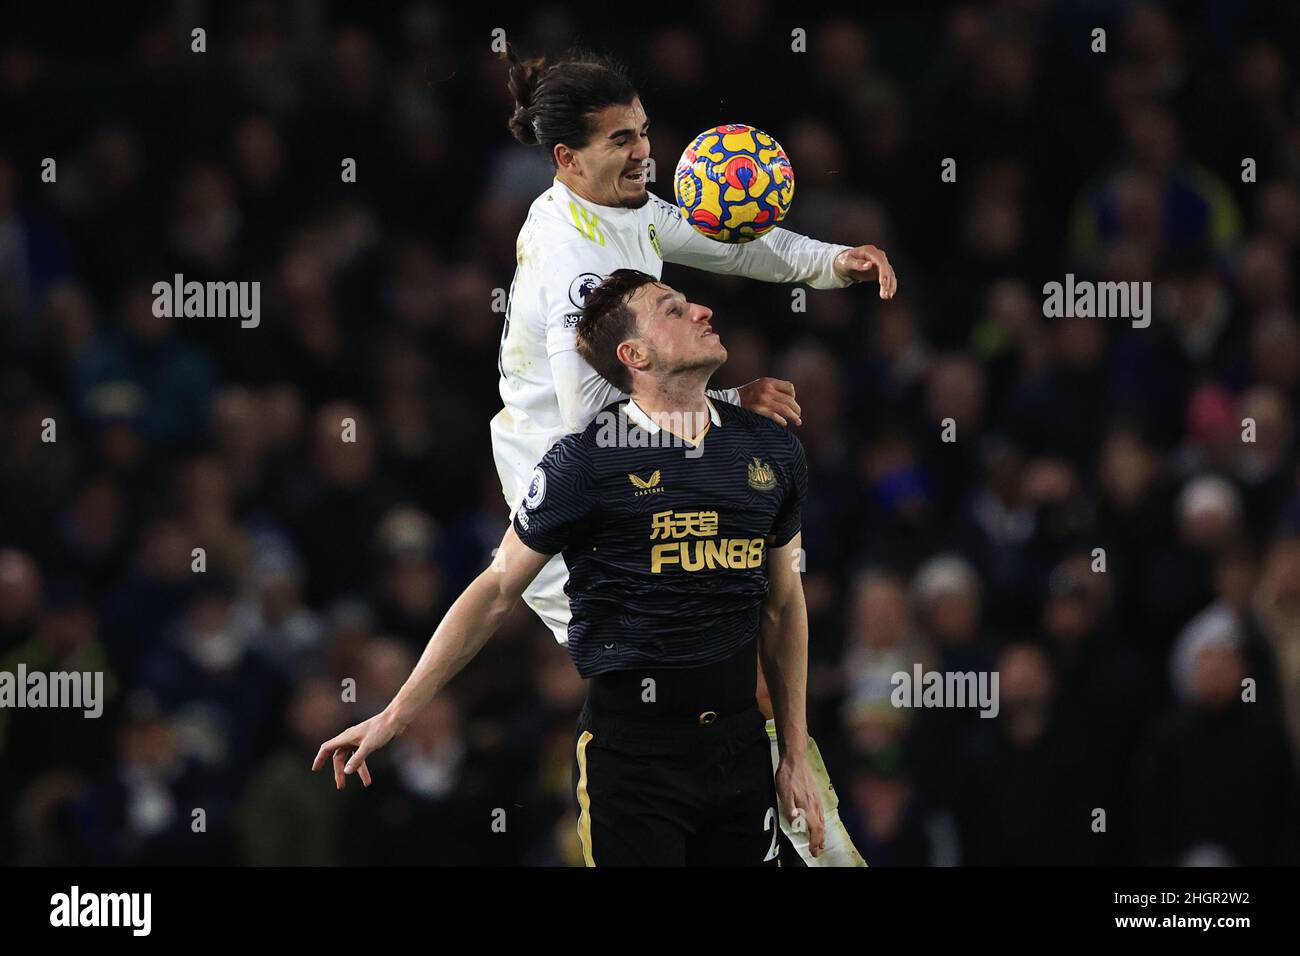 Leeds, UK. 22nd Jan, 2022. Pascal Struijk #21 of Leeds United and Chris Wood #20 of Newcastle United battle for the ball during the Premier League fixture Leeds United vs Newcastle United at Elland Road, Leeds, UK, 22nd January 2022 Credit: News Images /Alamy Live News Stock Photo